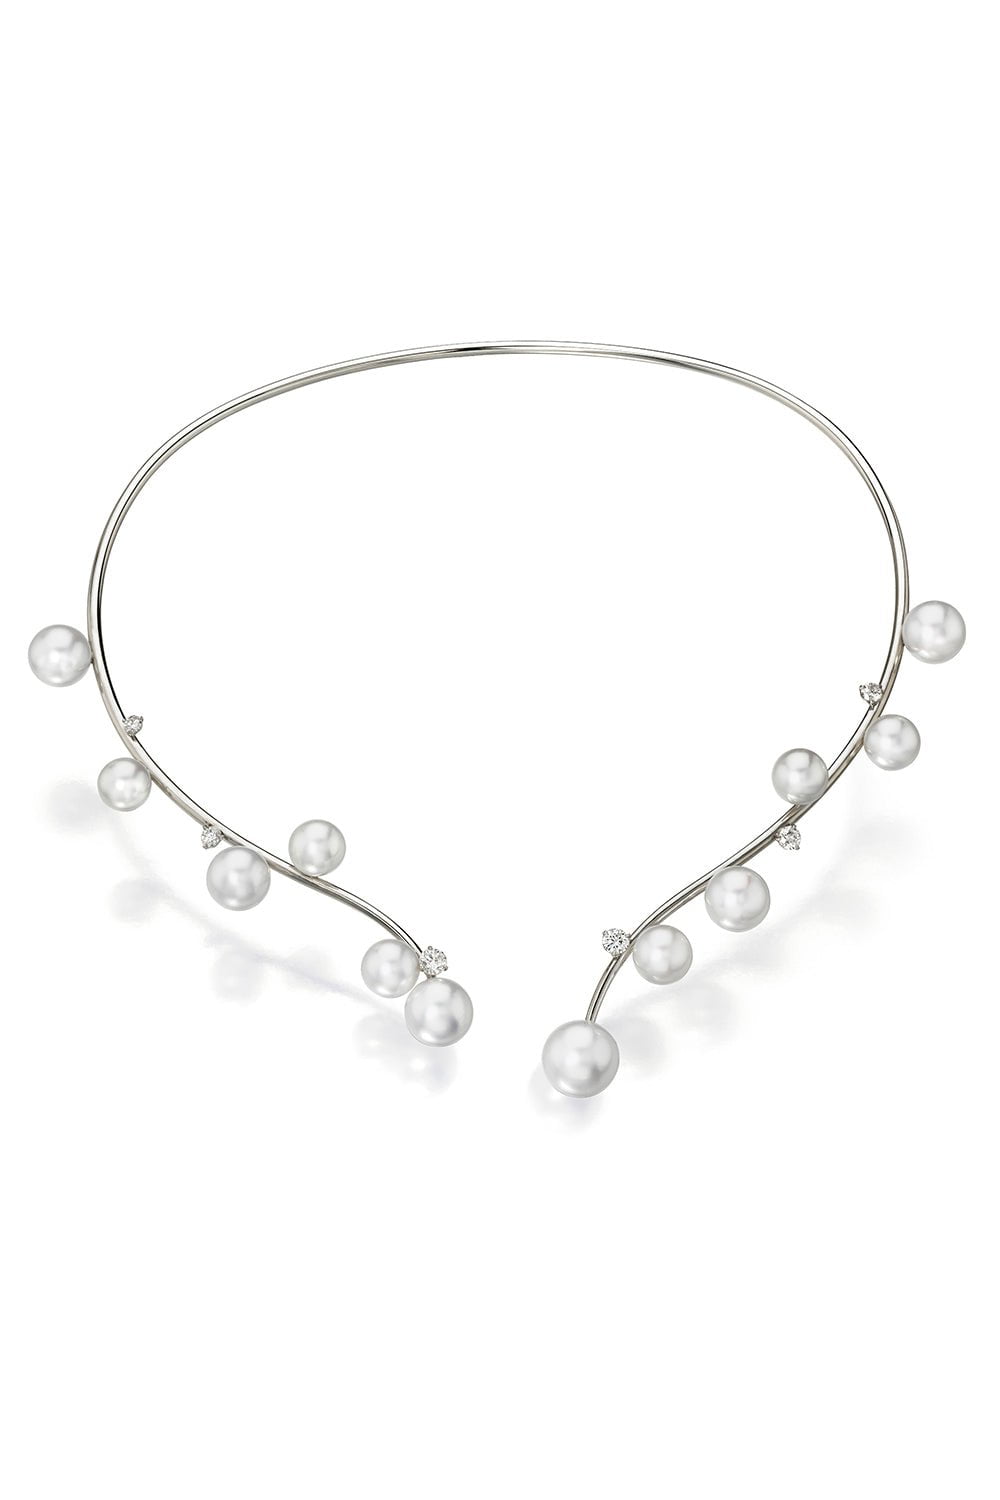 ASSAEL-Floating Open Bubble Necklace-WHITE GOLD